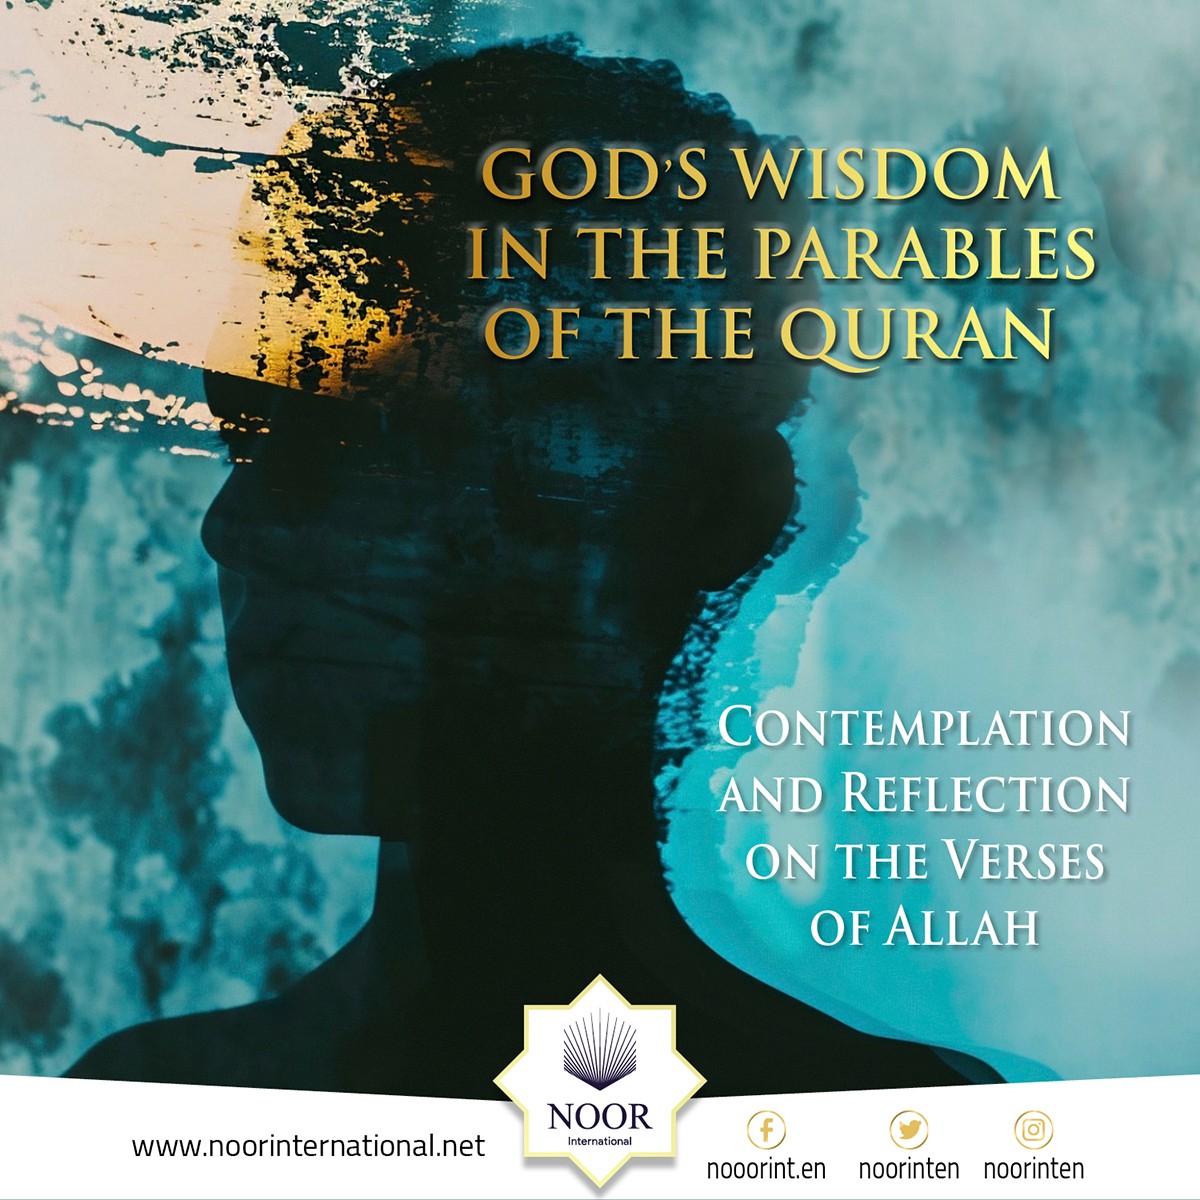 Parables in the Quran